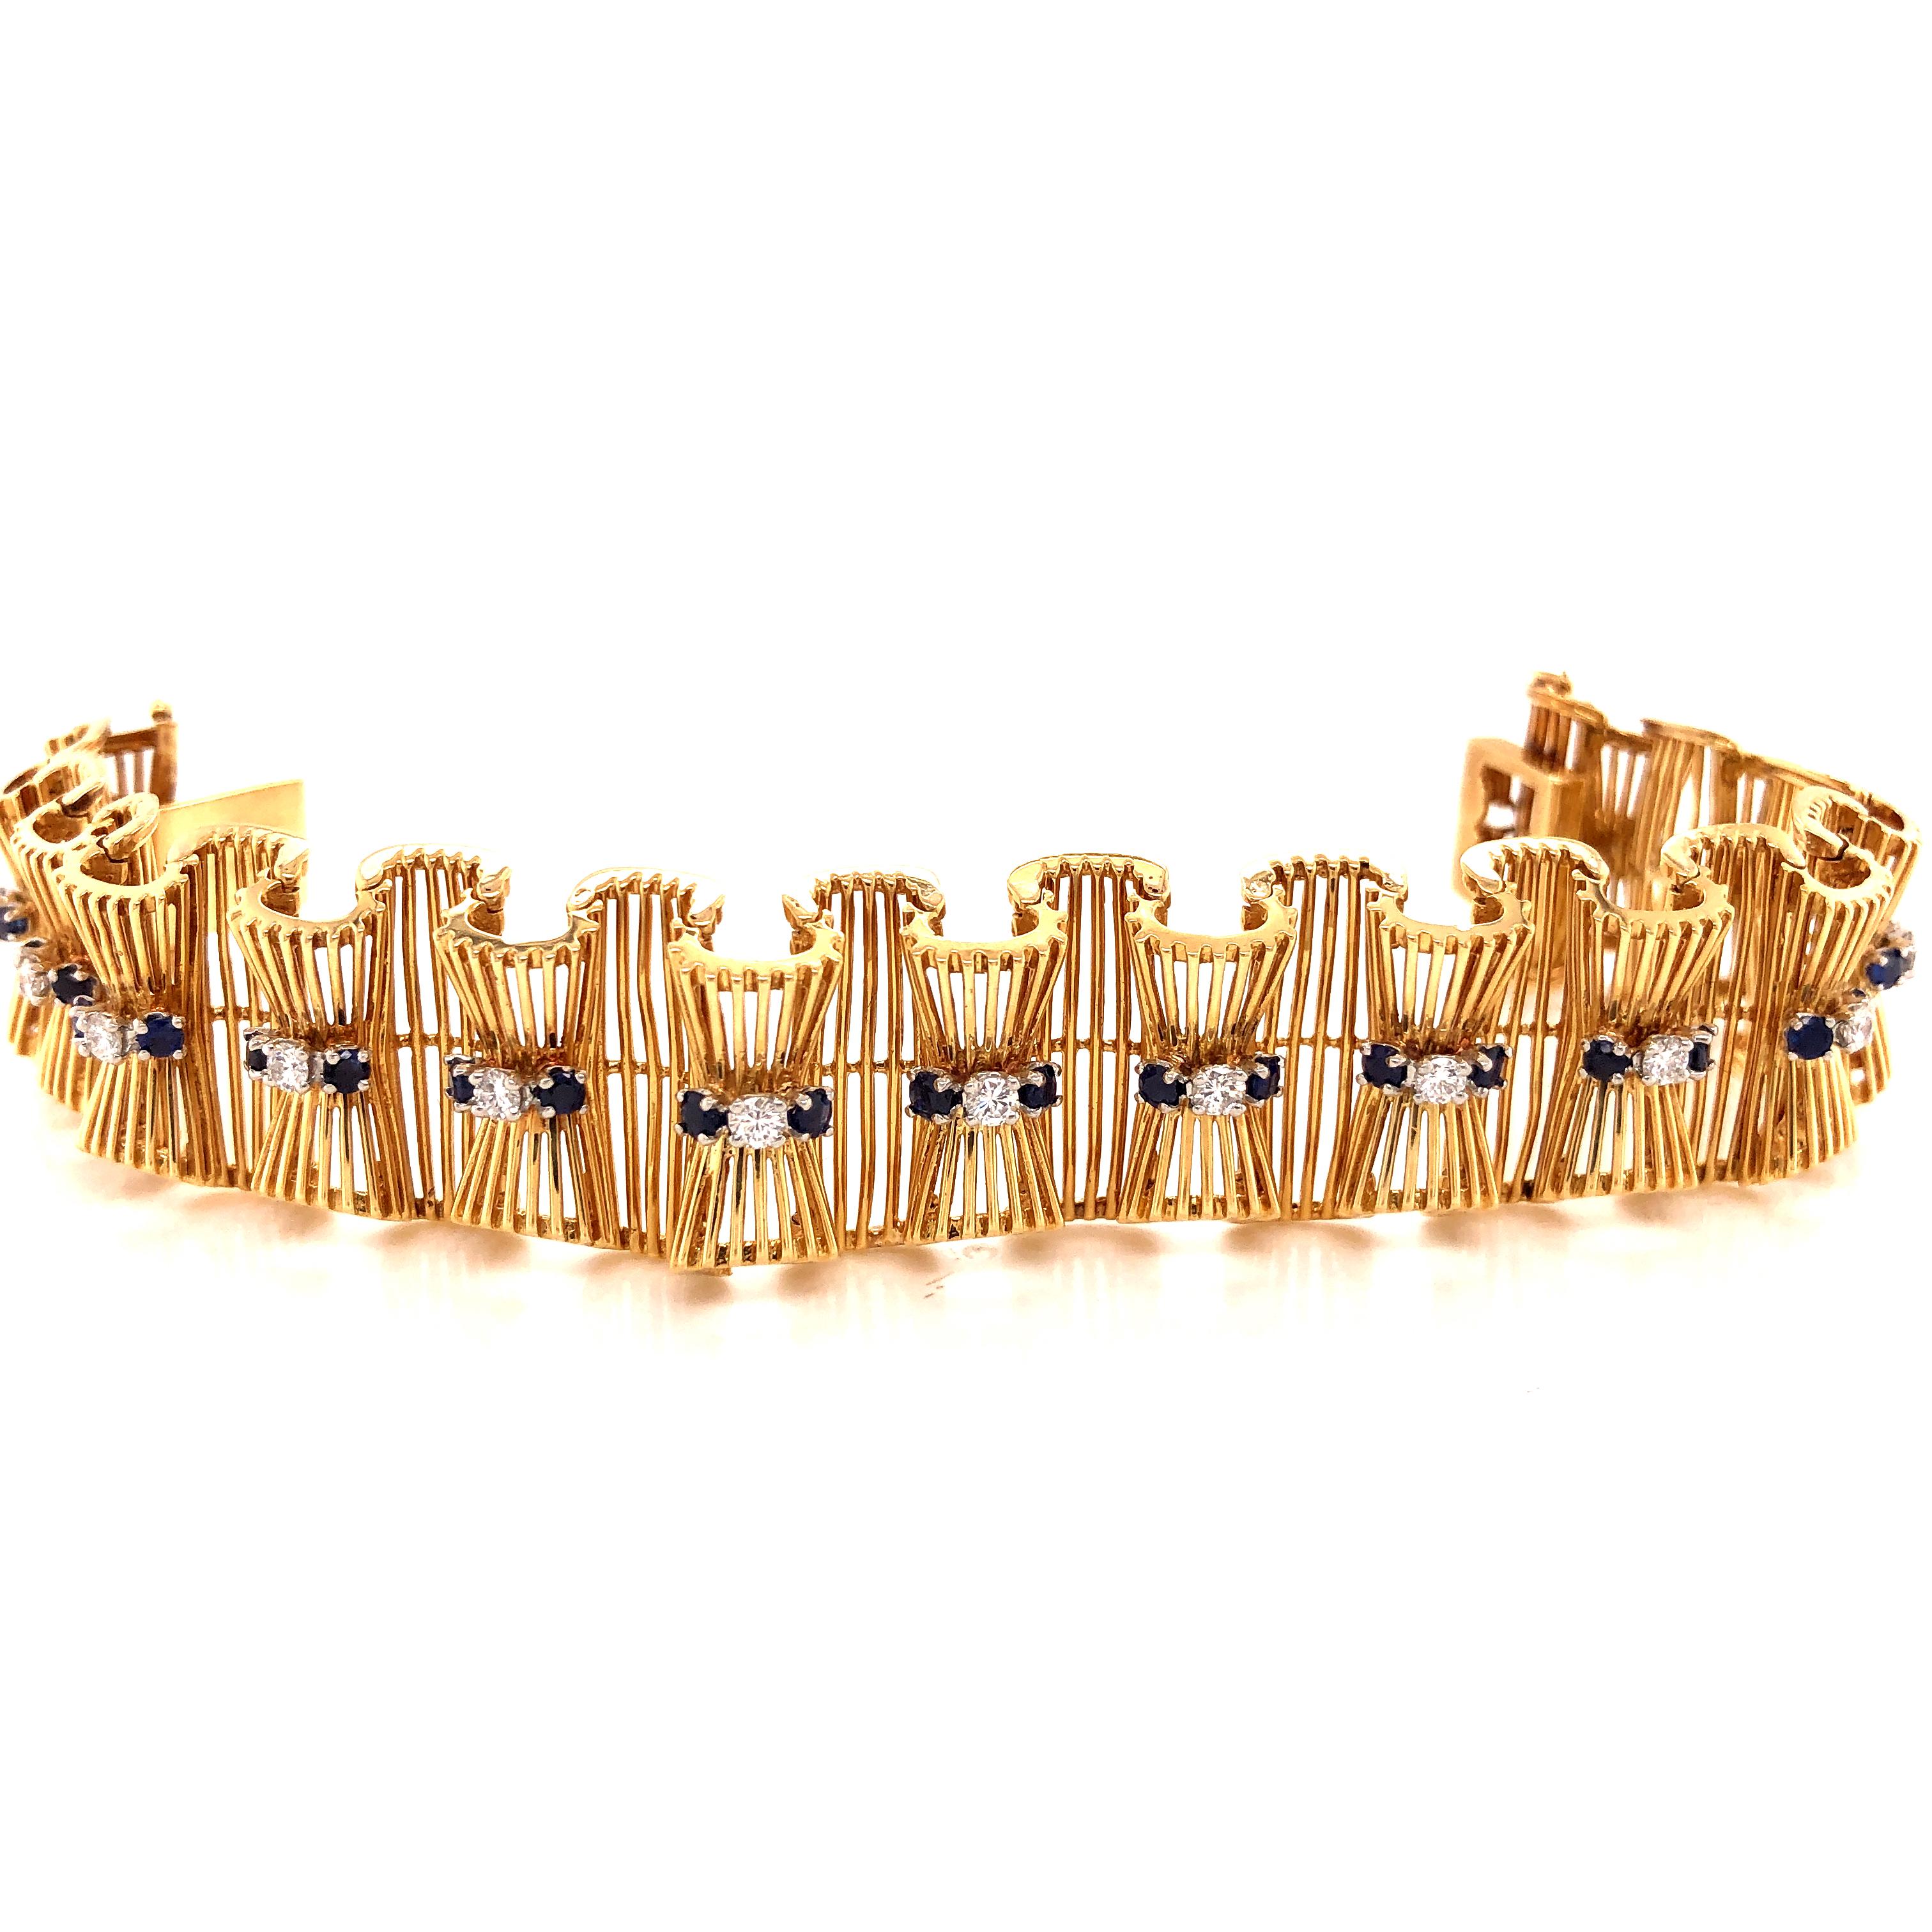 Amazing design on this vintage treasure by Hammerman Bros. The bracelet is crafted in 18k yellow gold  with details seen throughout. The bracelet displays a ribbon design with a silky wave link pattern. The bracelet shows amazing craftsmanship. The